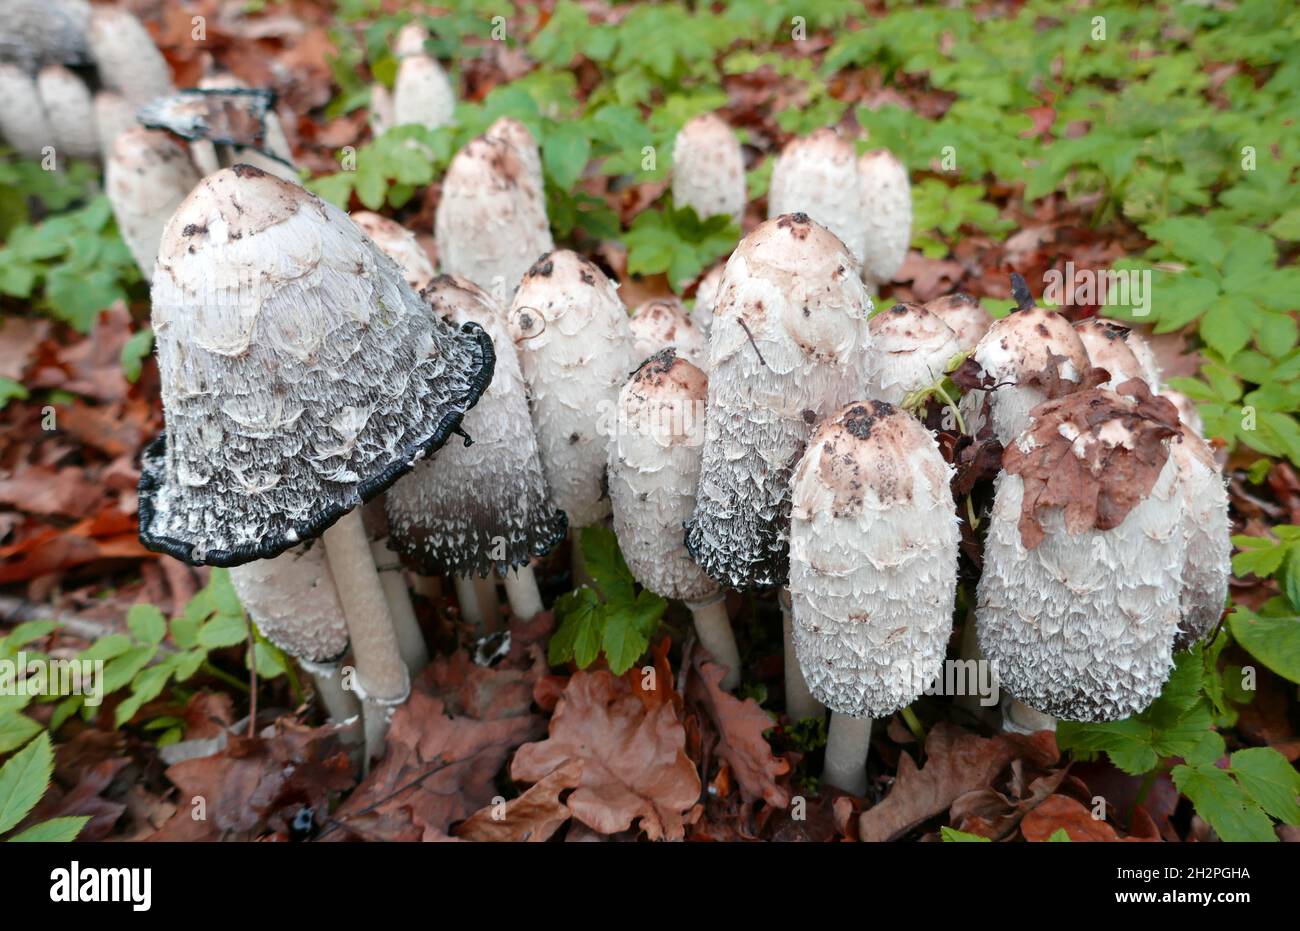 Coprinus comatus, the shaggy ink cap, lawyer's wig, or shaggy mane, is the name of these mushrooms. The caps are white, and covered with scales. Stock Photo